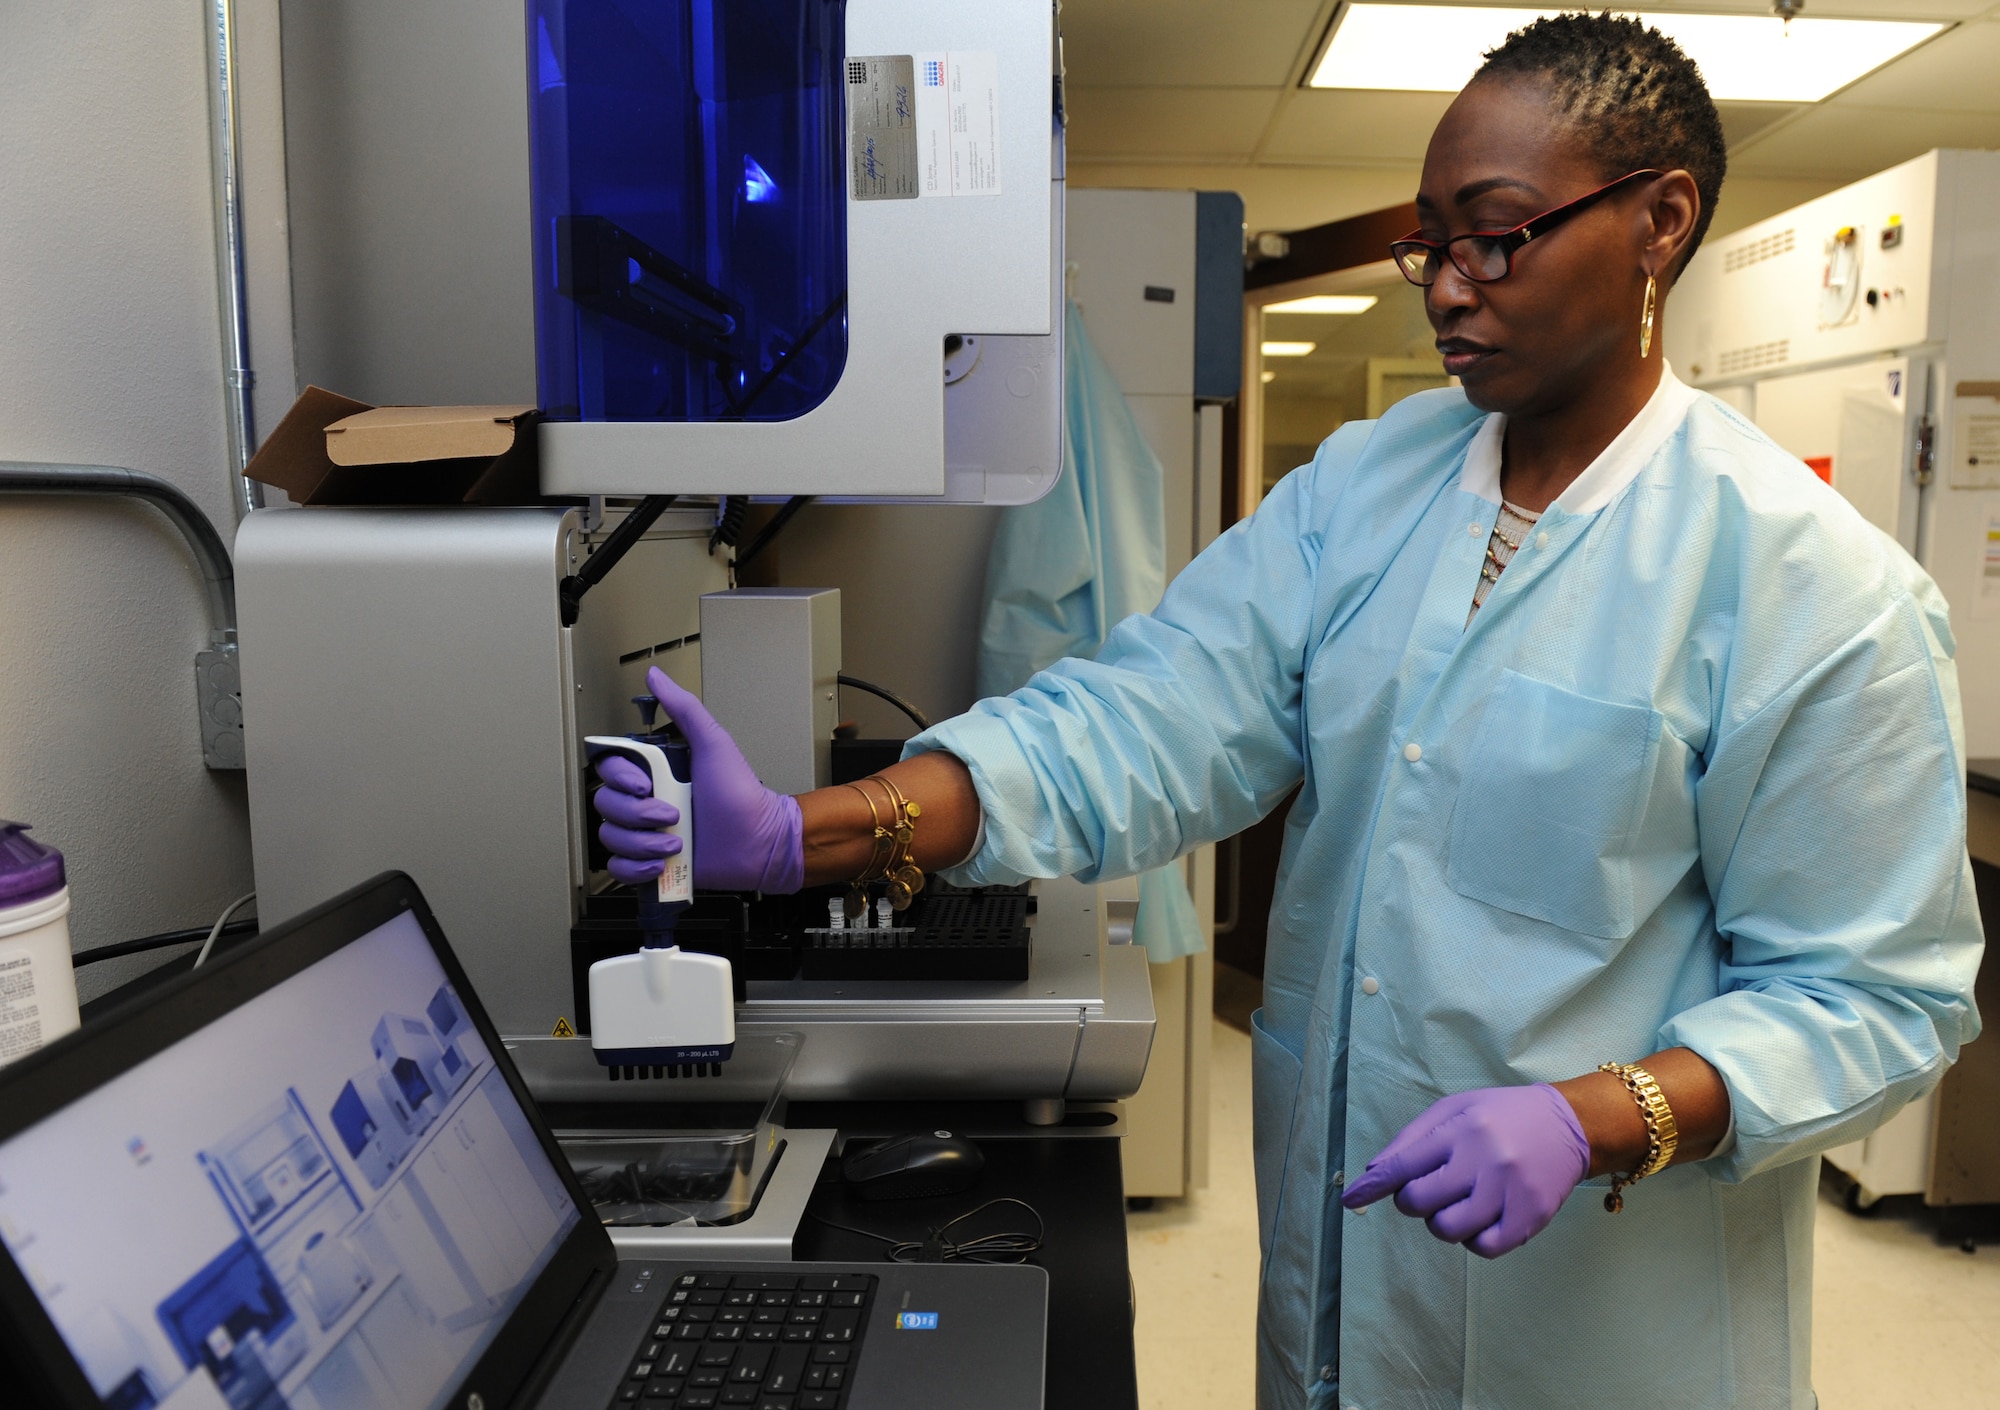 DeShannon Hall, 81st Medical Operations Squadron molecular technologist, uses a robotic sample prep handler at the 81st Medical Group’s genetics center Mar. 16, 2016, Keesler Air Force Base, Miss. The Air Force Medical Genetics Center is the only laboratory of its kind in the entire Defense Department. Made up of the cytogenetics and molecular genetics labs, the center is focused on providing clinical and laboratory diagnostic services to support all DOD facilities worldwide. (U.S. Air Force photo by Kemberly Groue)